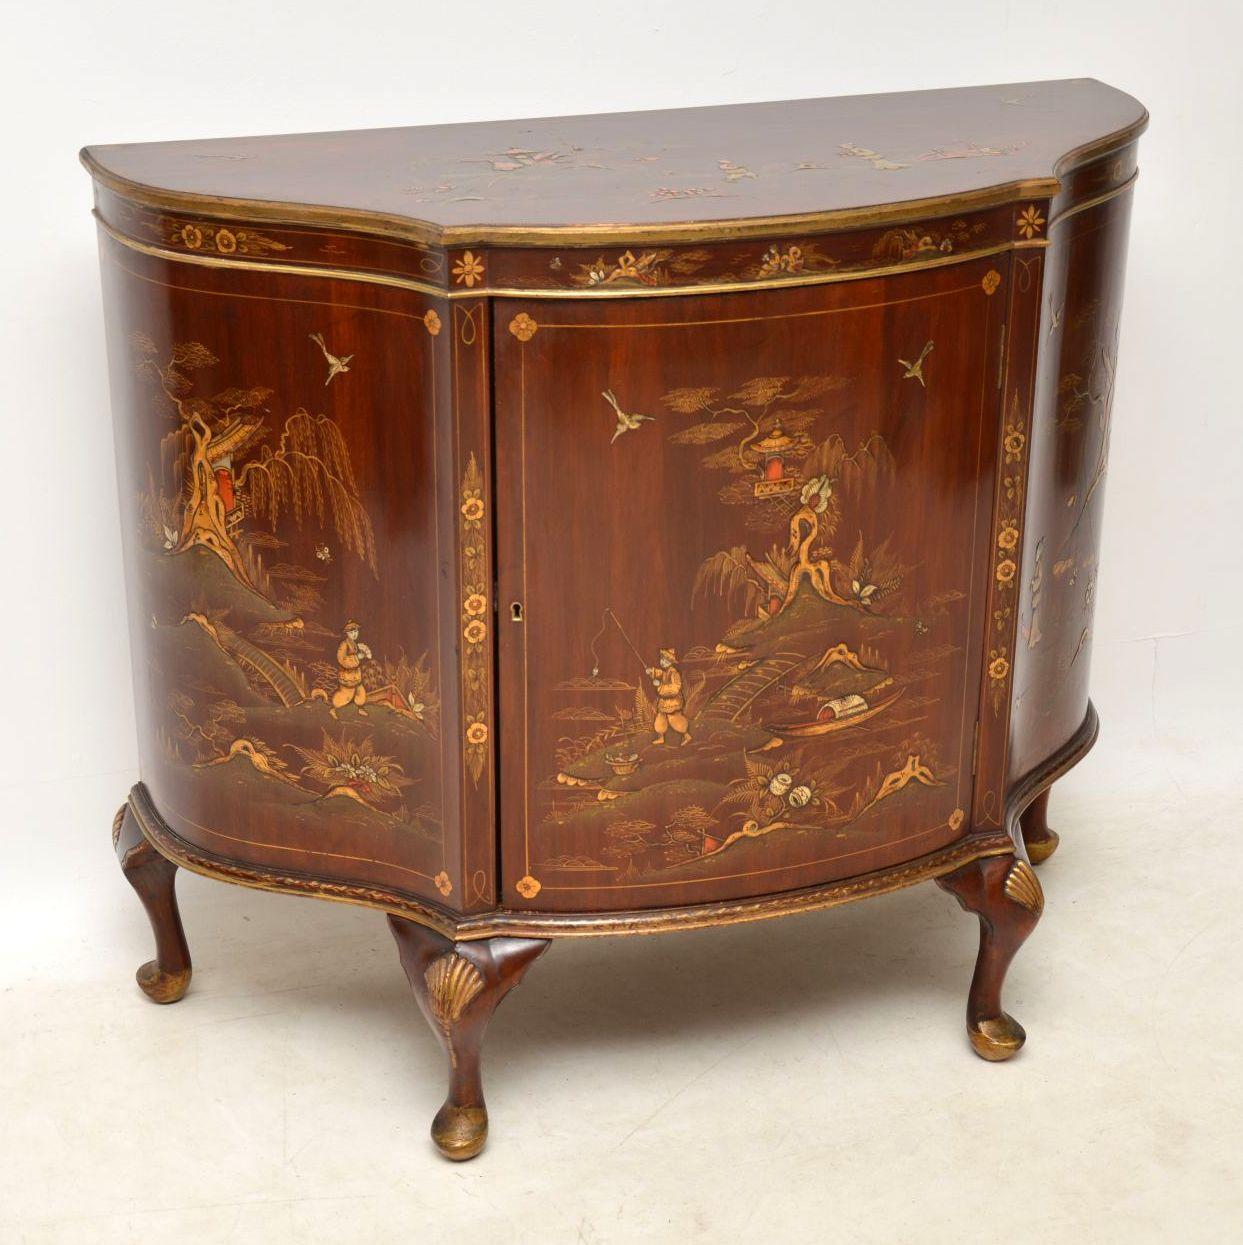 Antique chinoiserie and mahogany side cabinet with a serpentine shaped front. The Oriental decoration is all-over the top & the front. It's of very high quality, with lovely colors and various scenes. Please enlarge all the images to see it all in